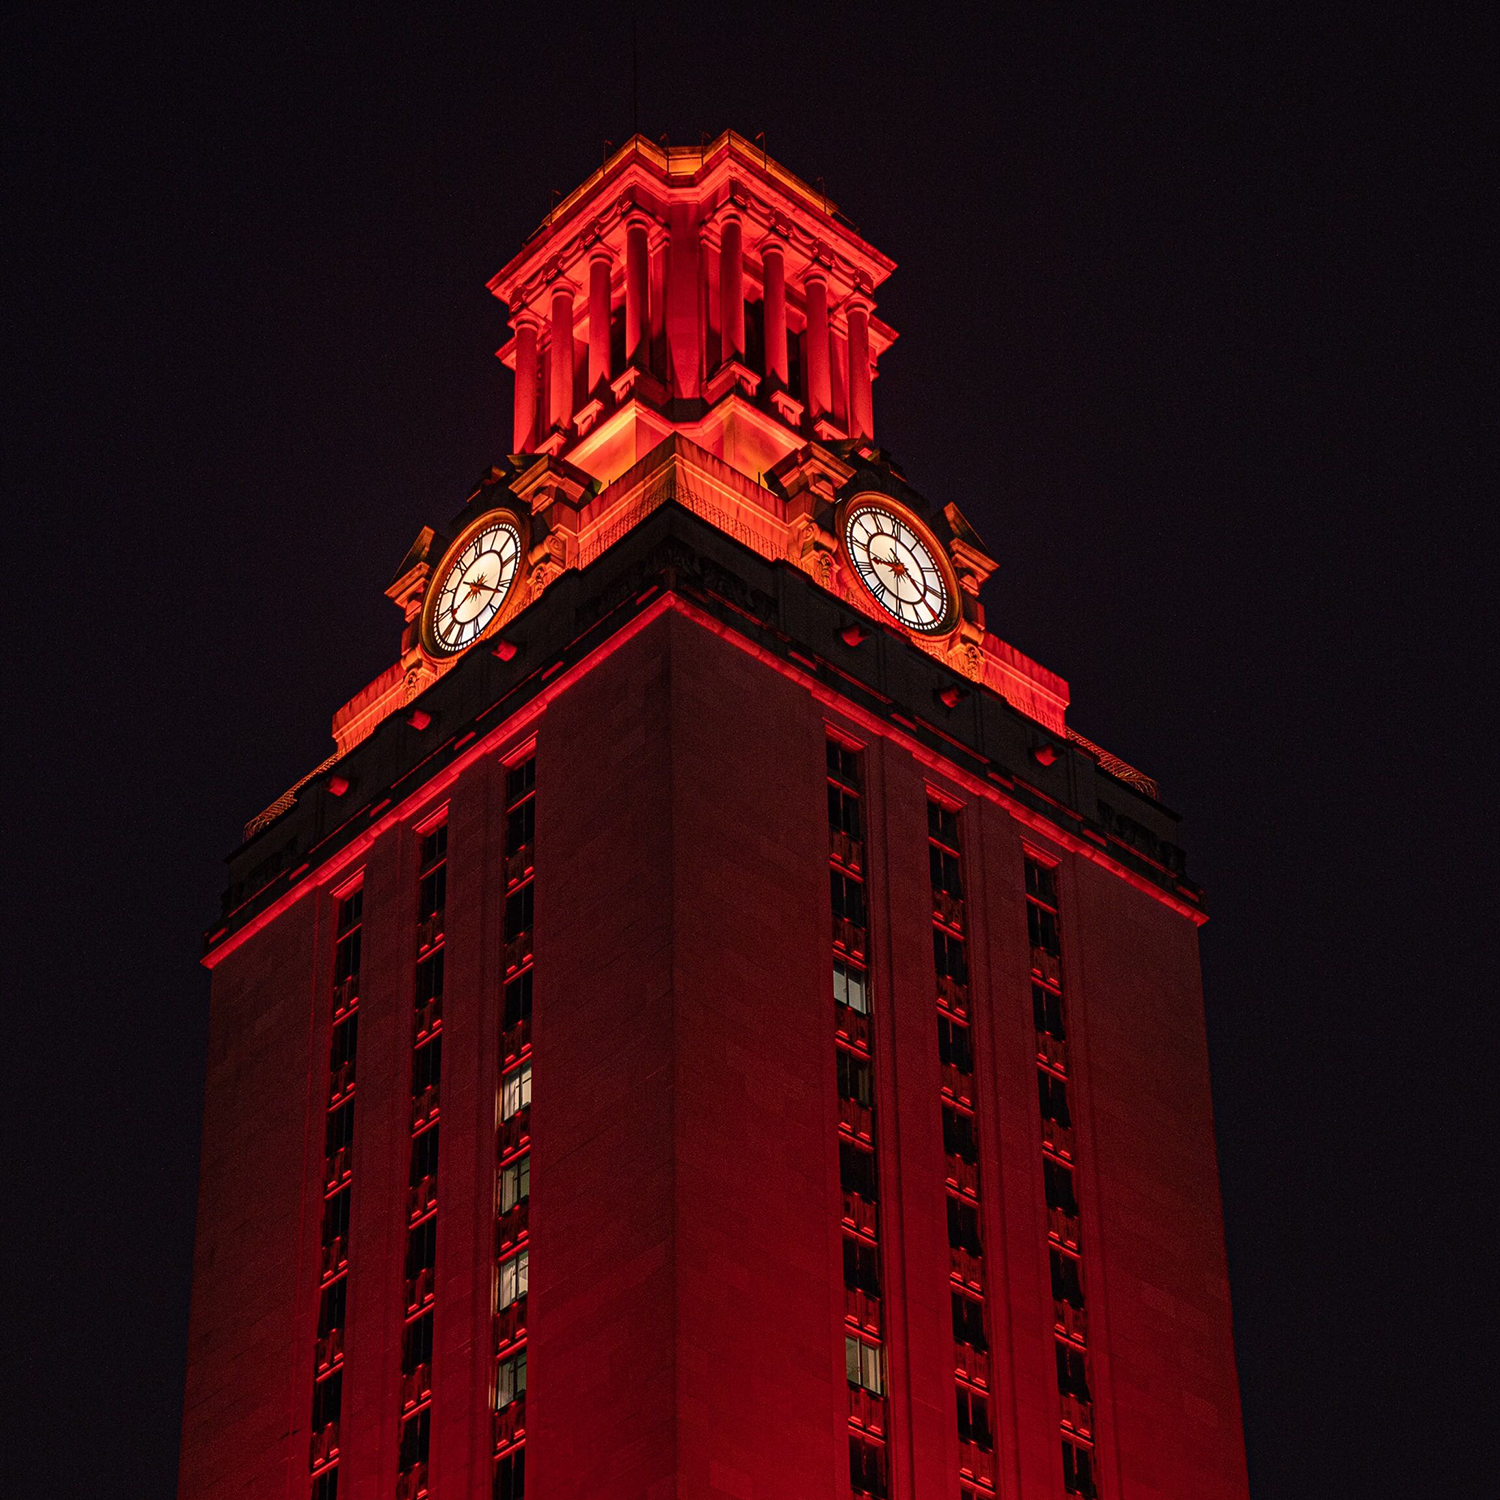 Light the Tower: Longhorns Win 2 National Titles